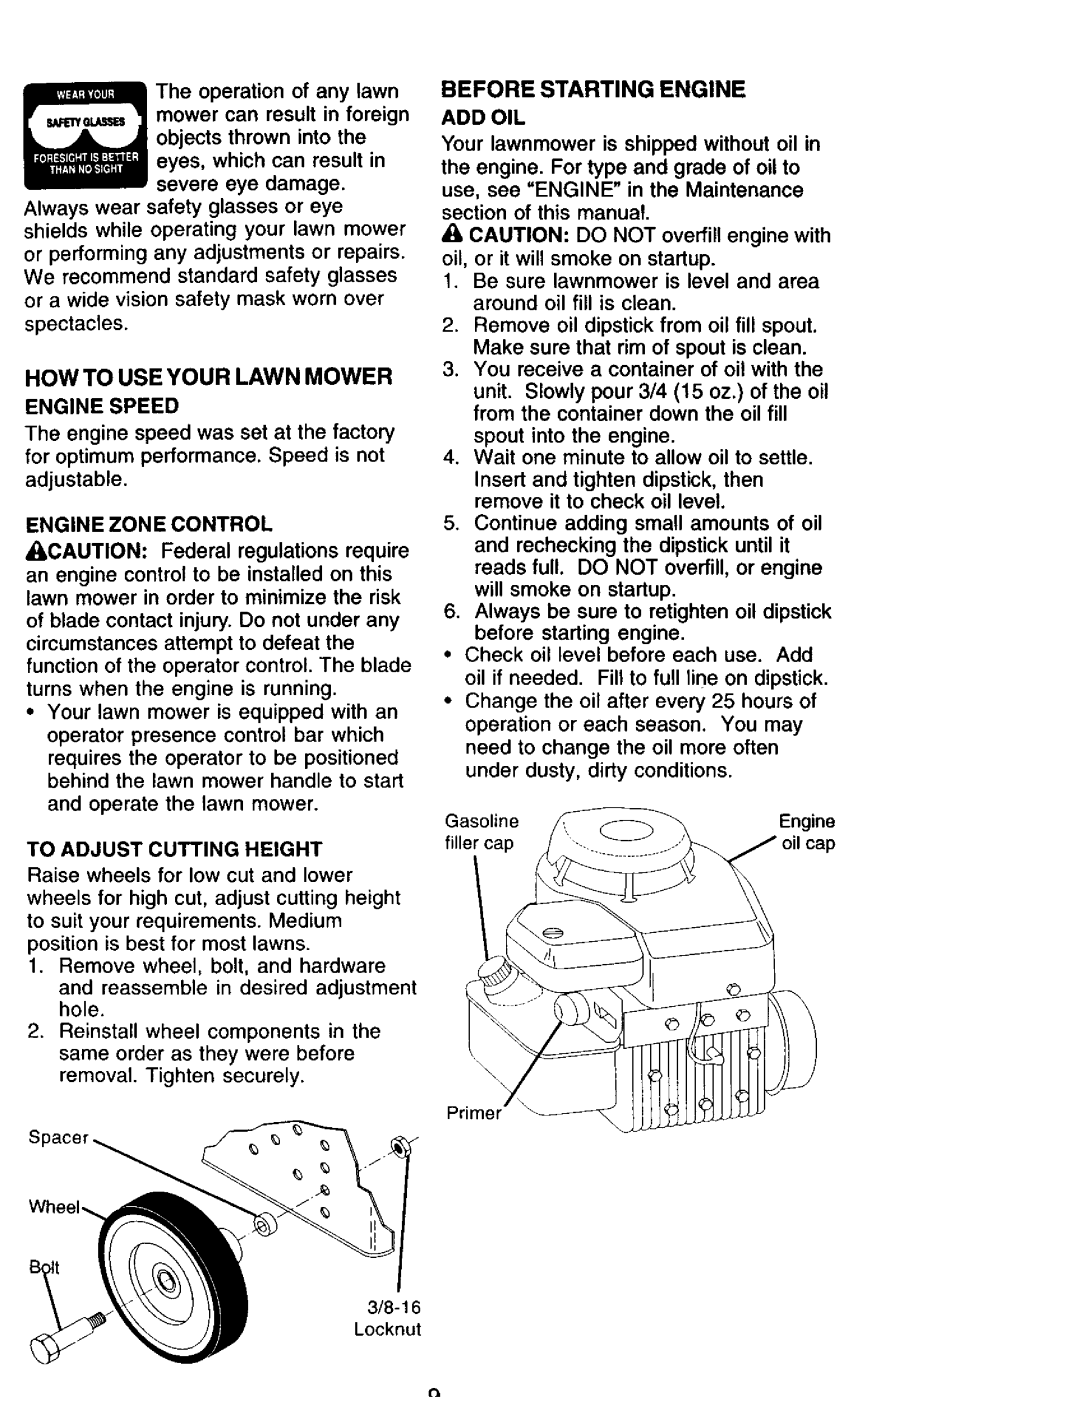 Sears 944.36201 owner manual How To Use Your Lawn Mower, Before Starting Engine 